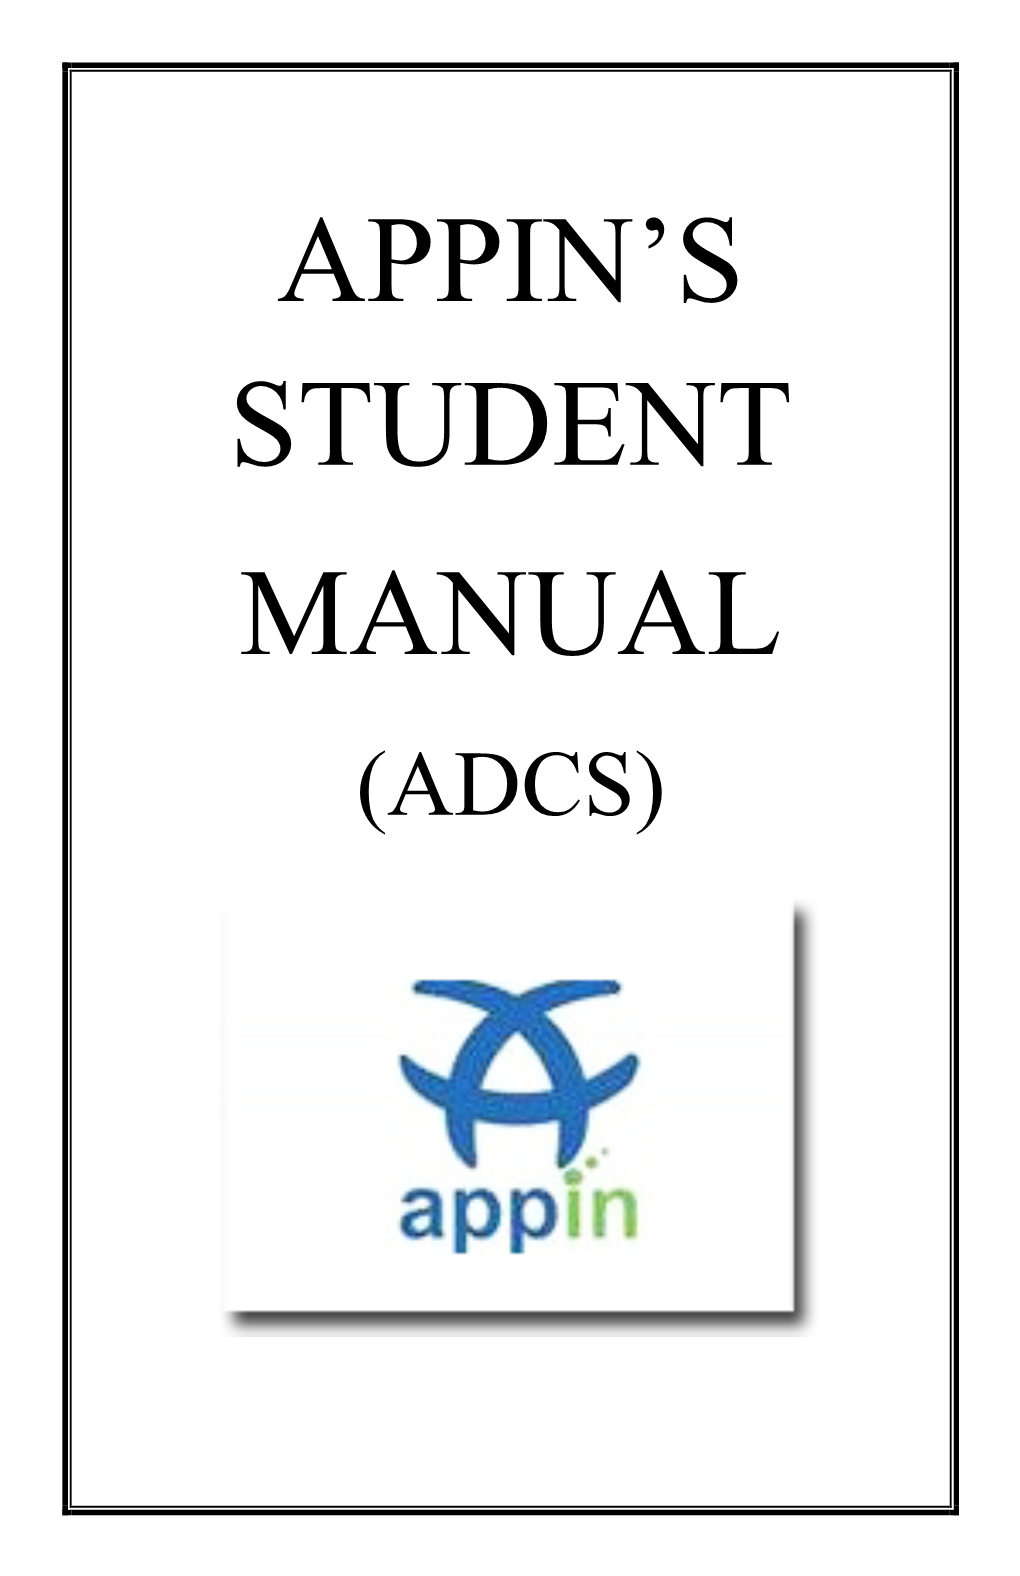 Appin's Student Manual